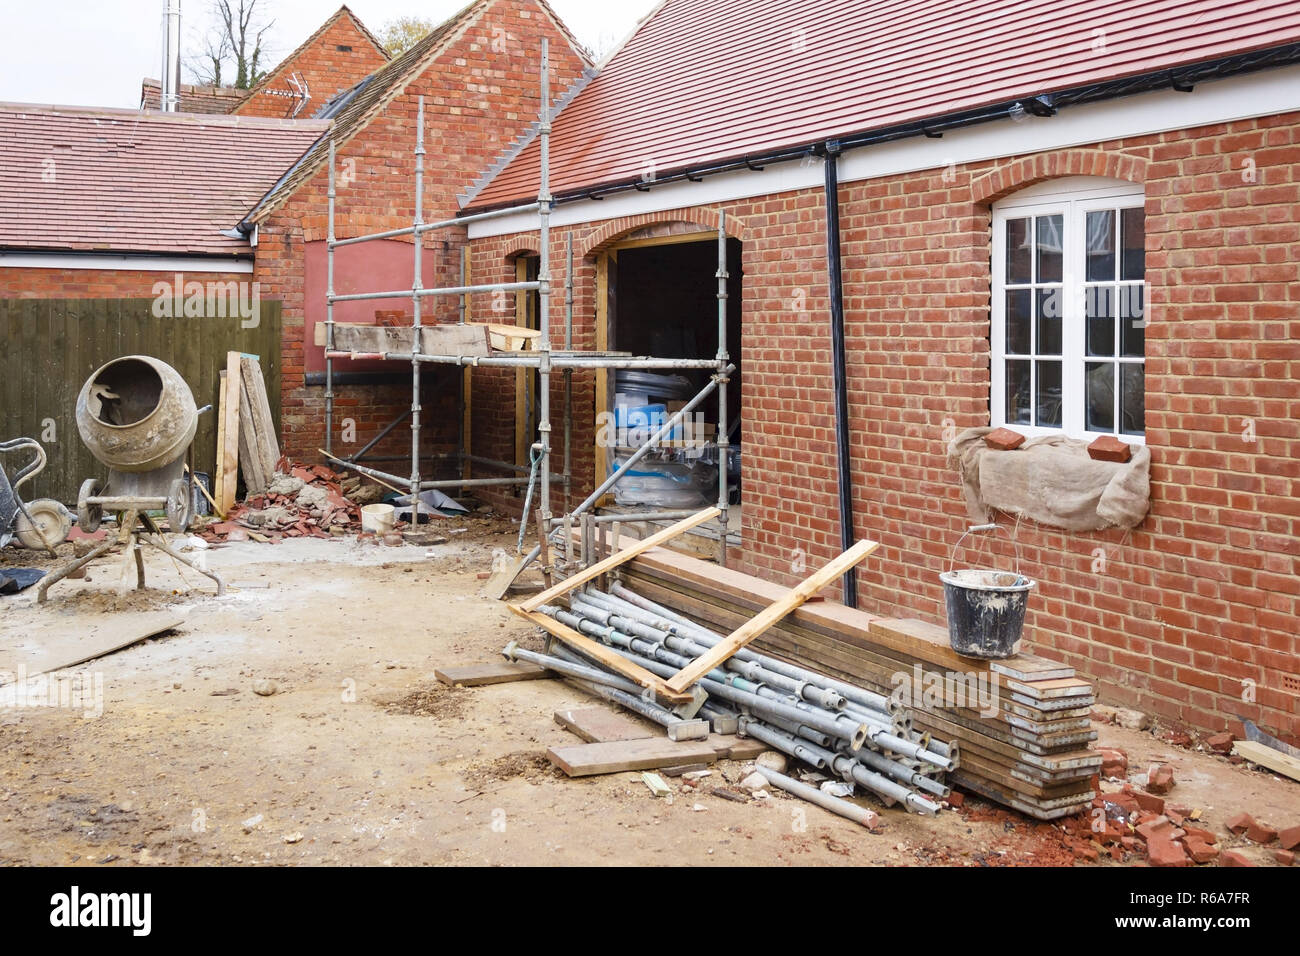 Building site in UK with brick house extension under construction Stock Photo